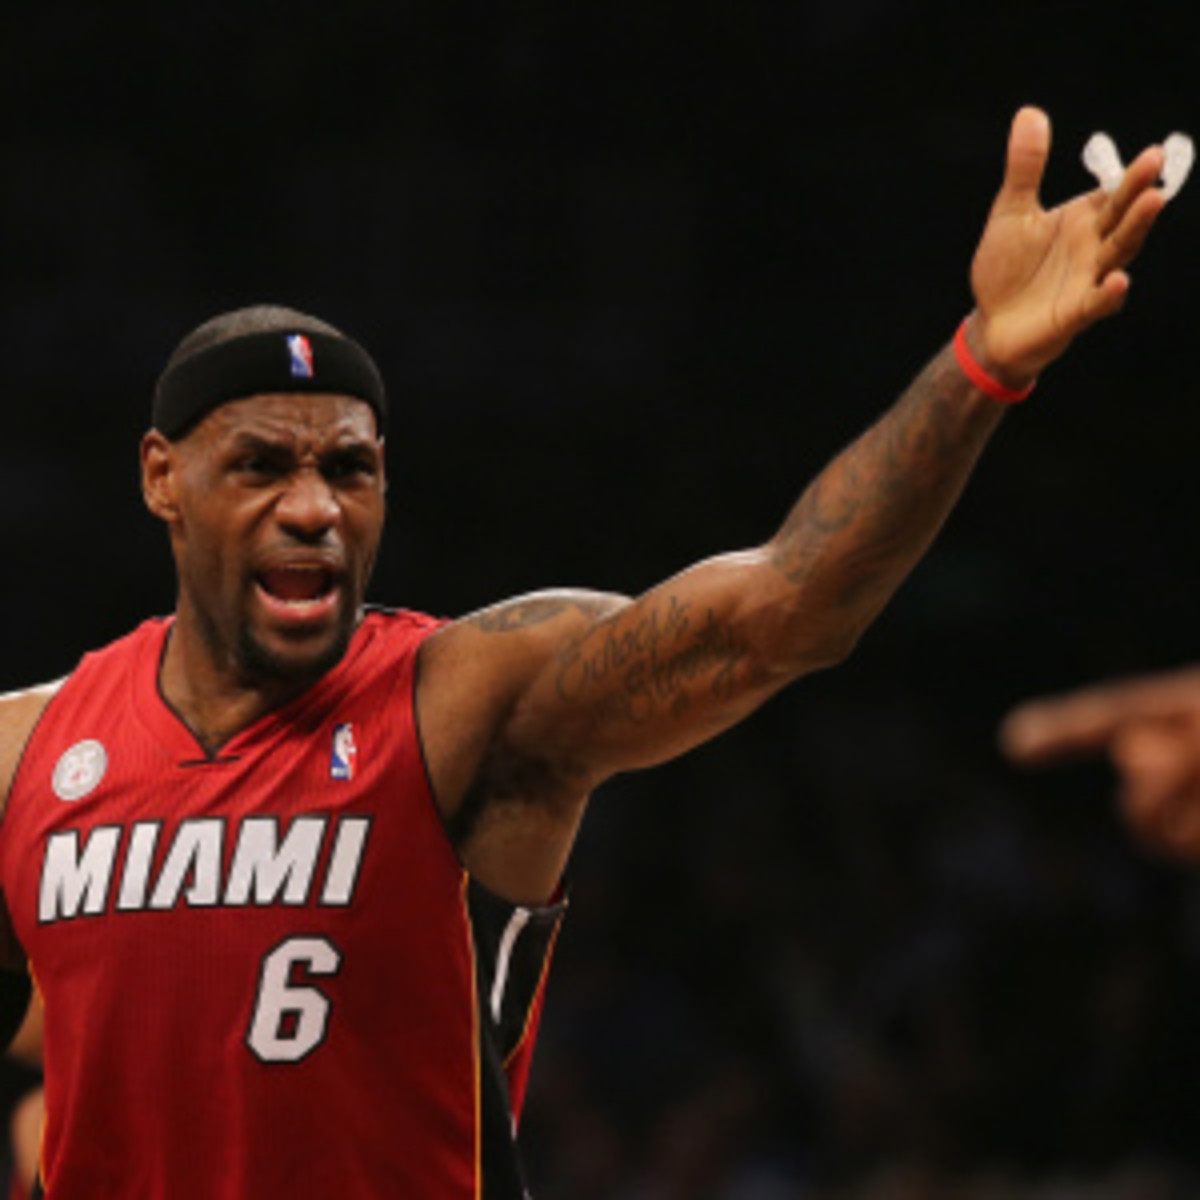 LeBron James ripped into Reggie Evans after Evans dismissed the Heat's title. (Al Bello/Getty Images)